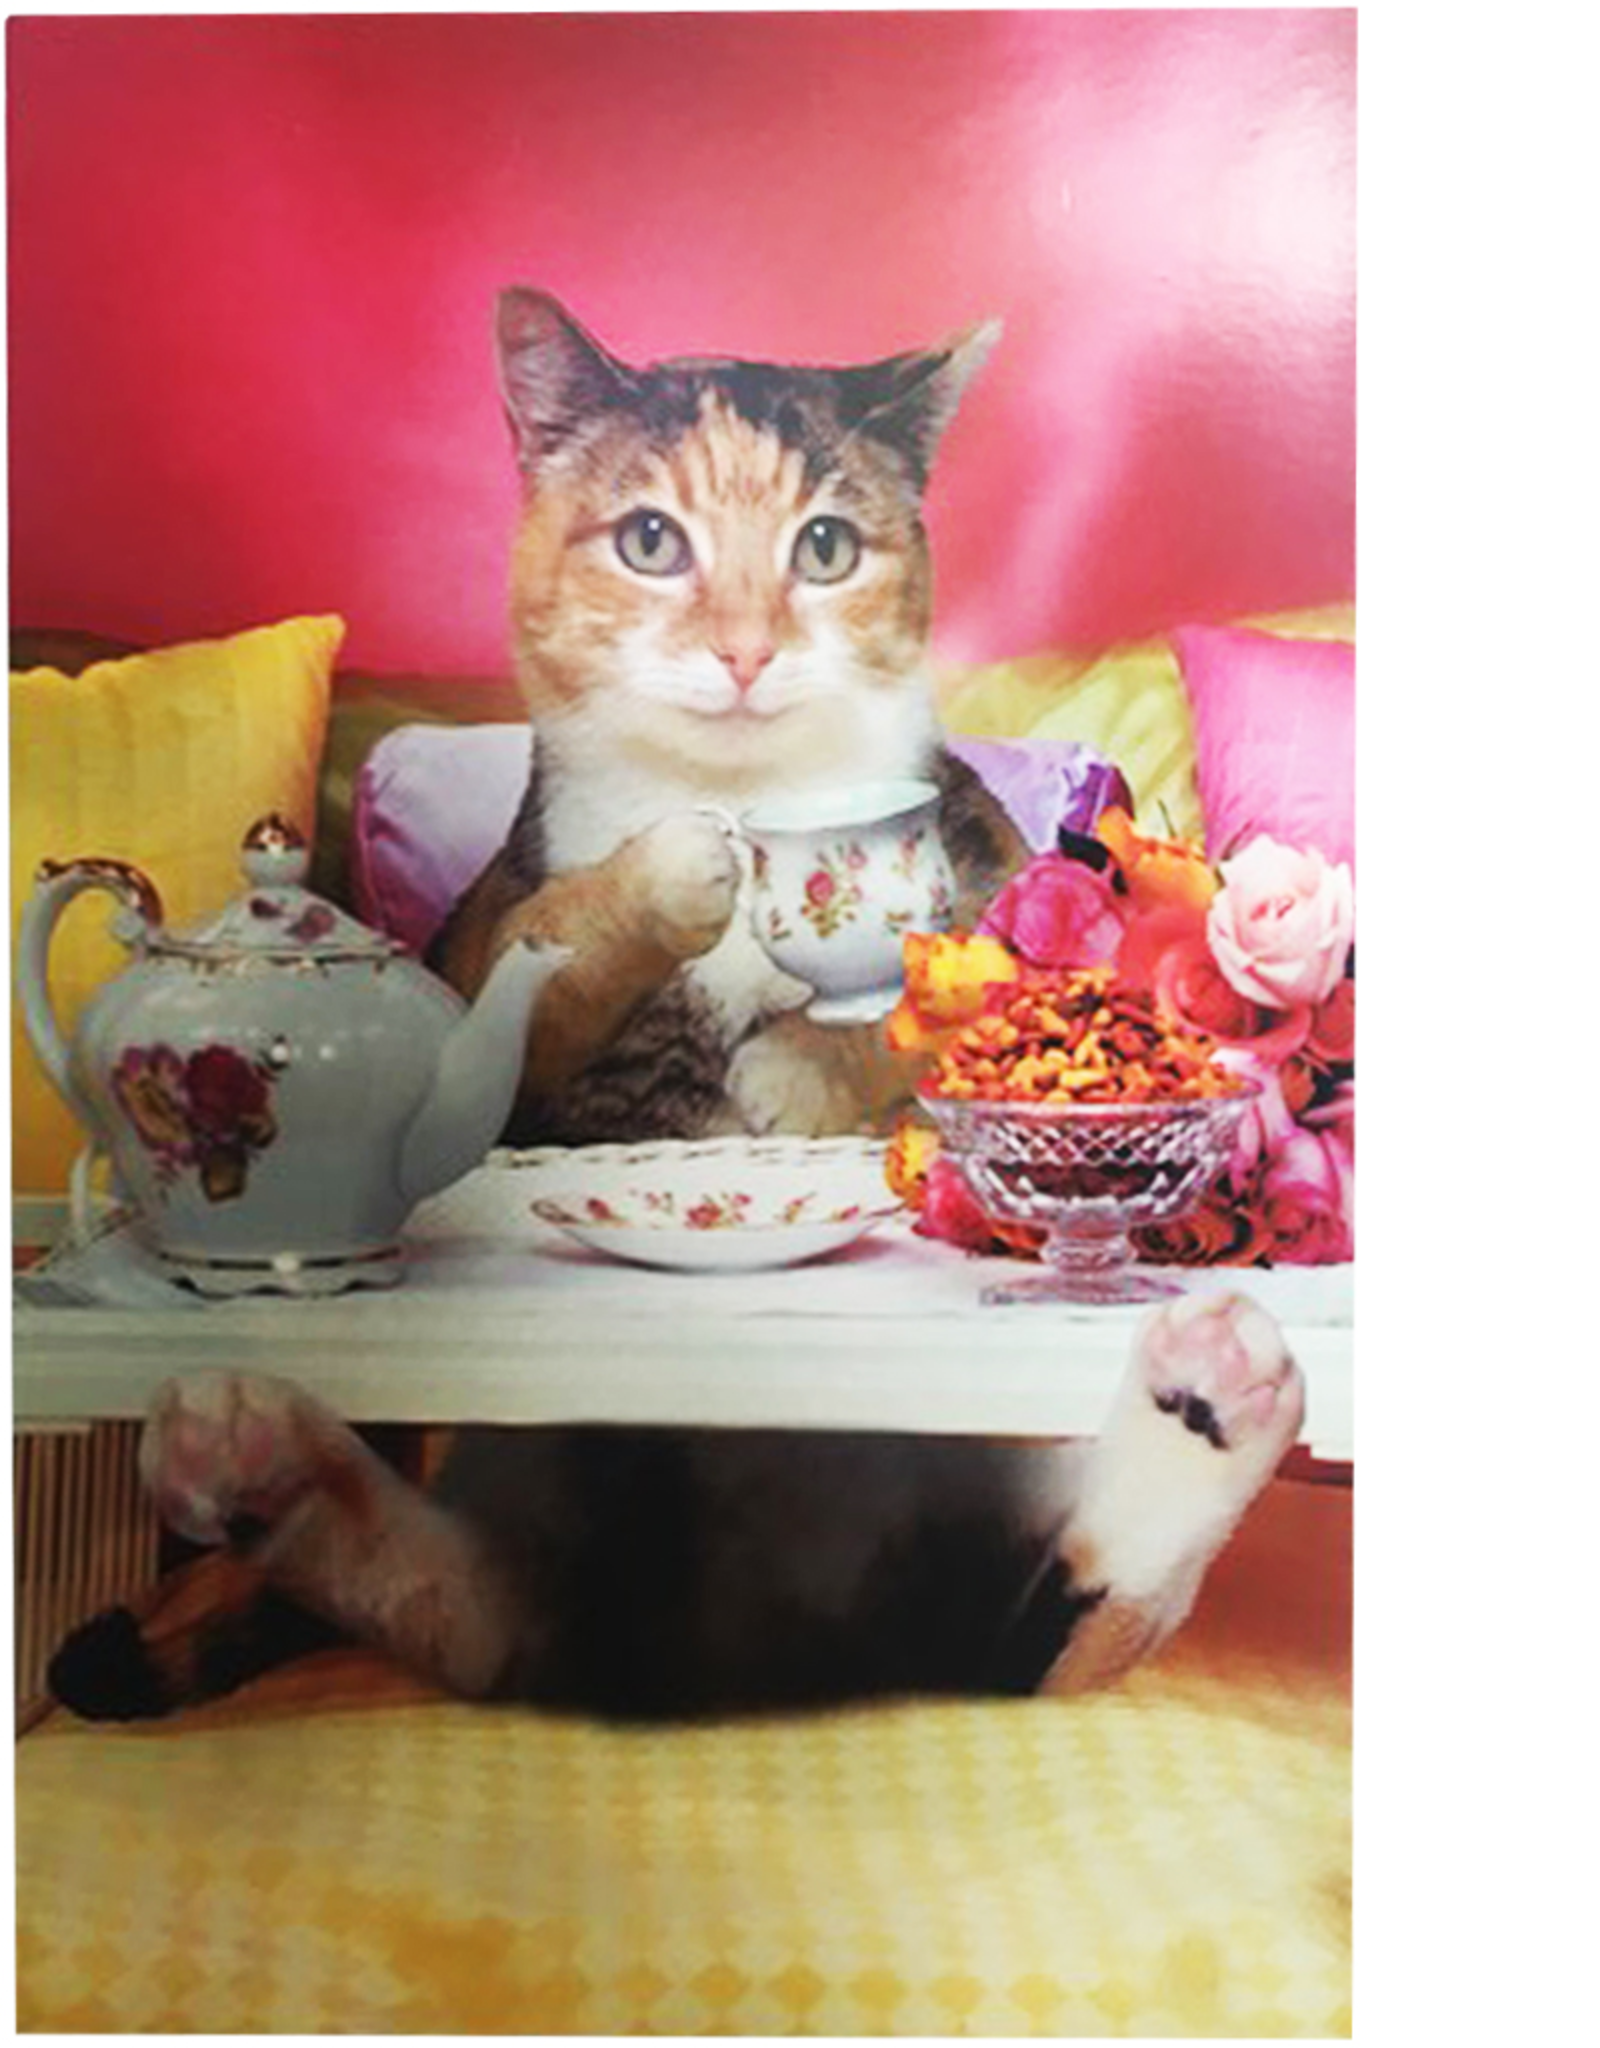 Mothers Day Card Breakfast In Bed Cat Holidng Tea Cup